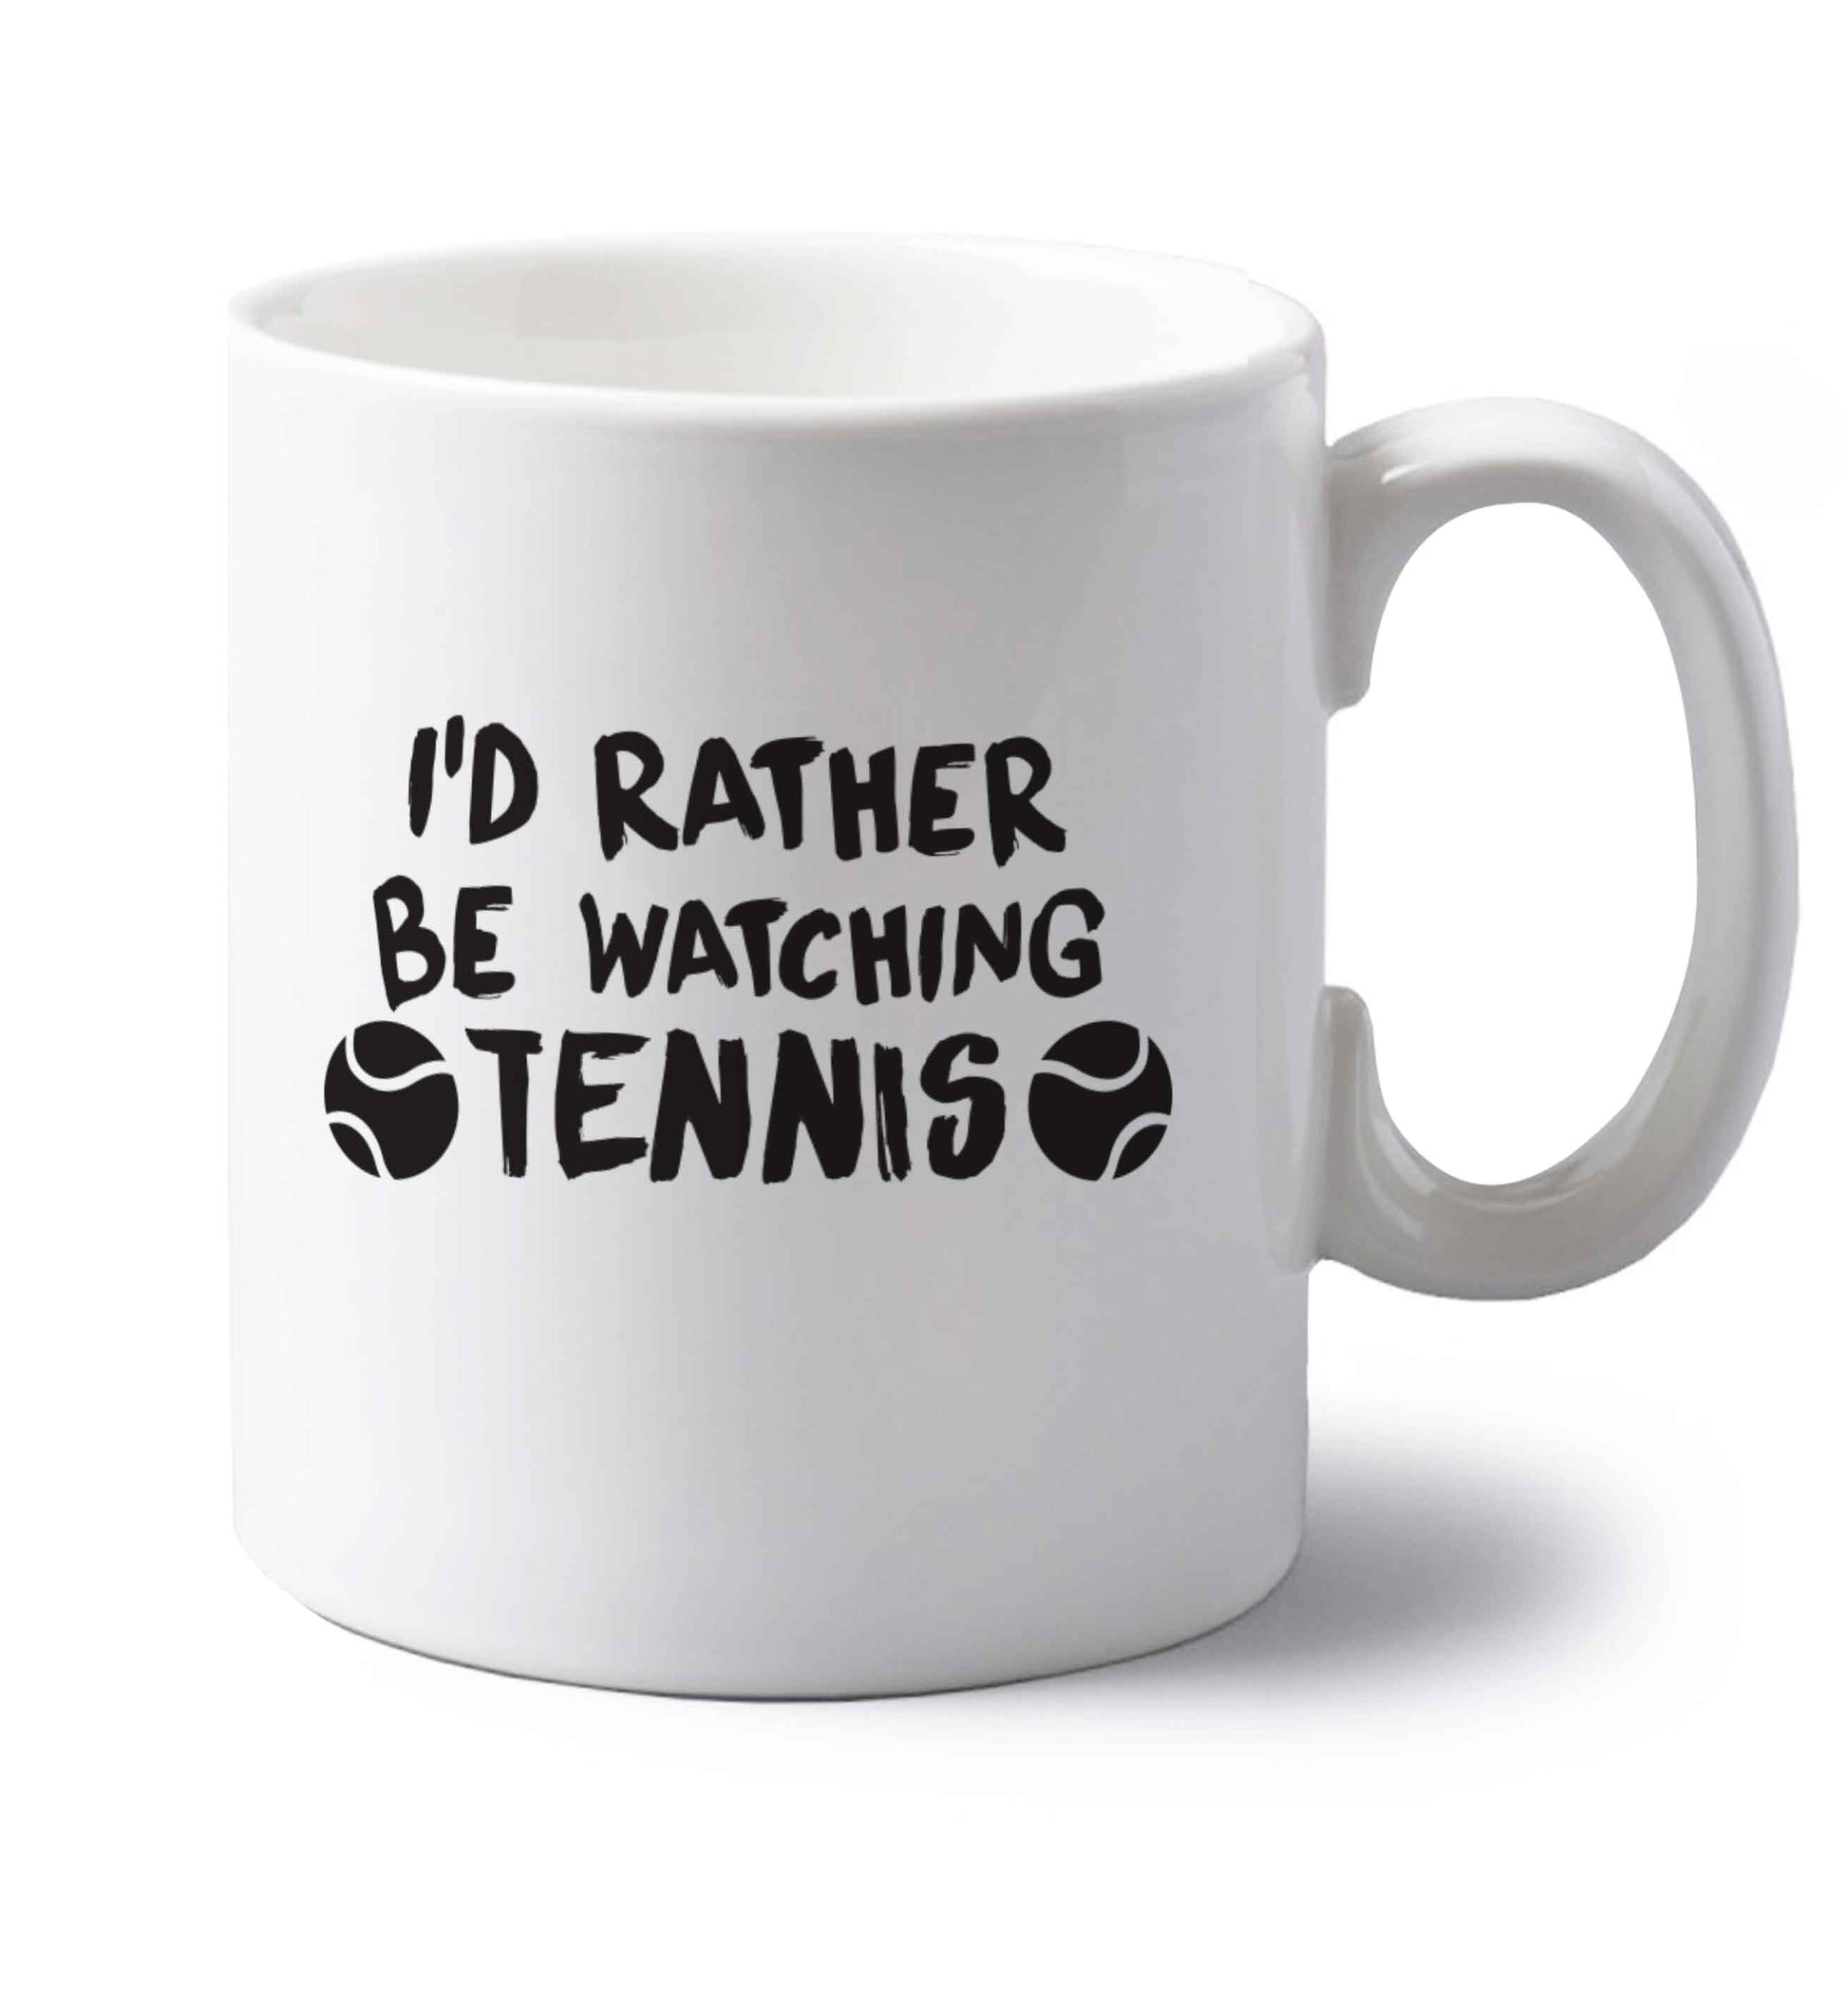 I'd rather be watching the tennis left handed white ceramic mug 